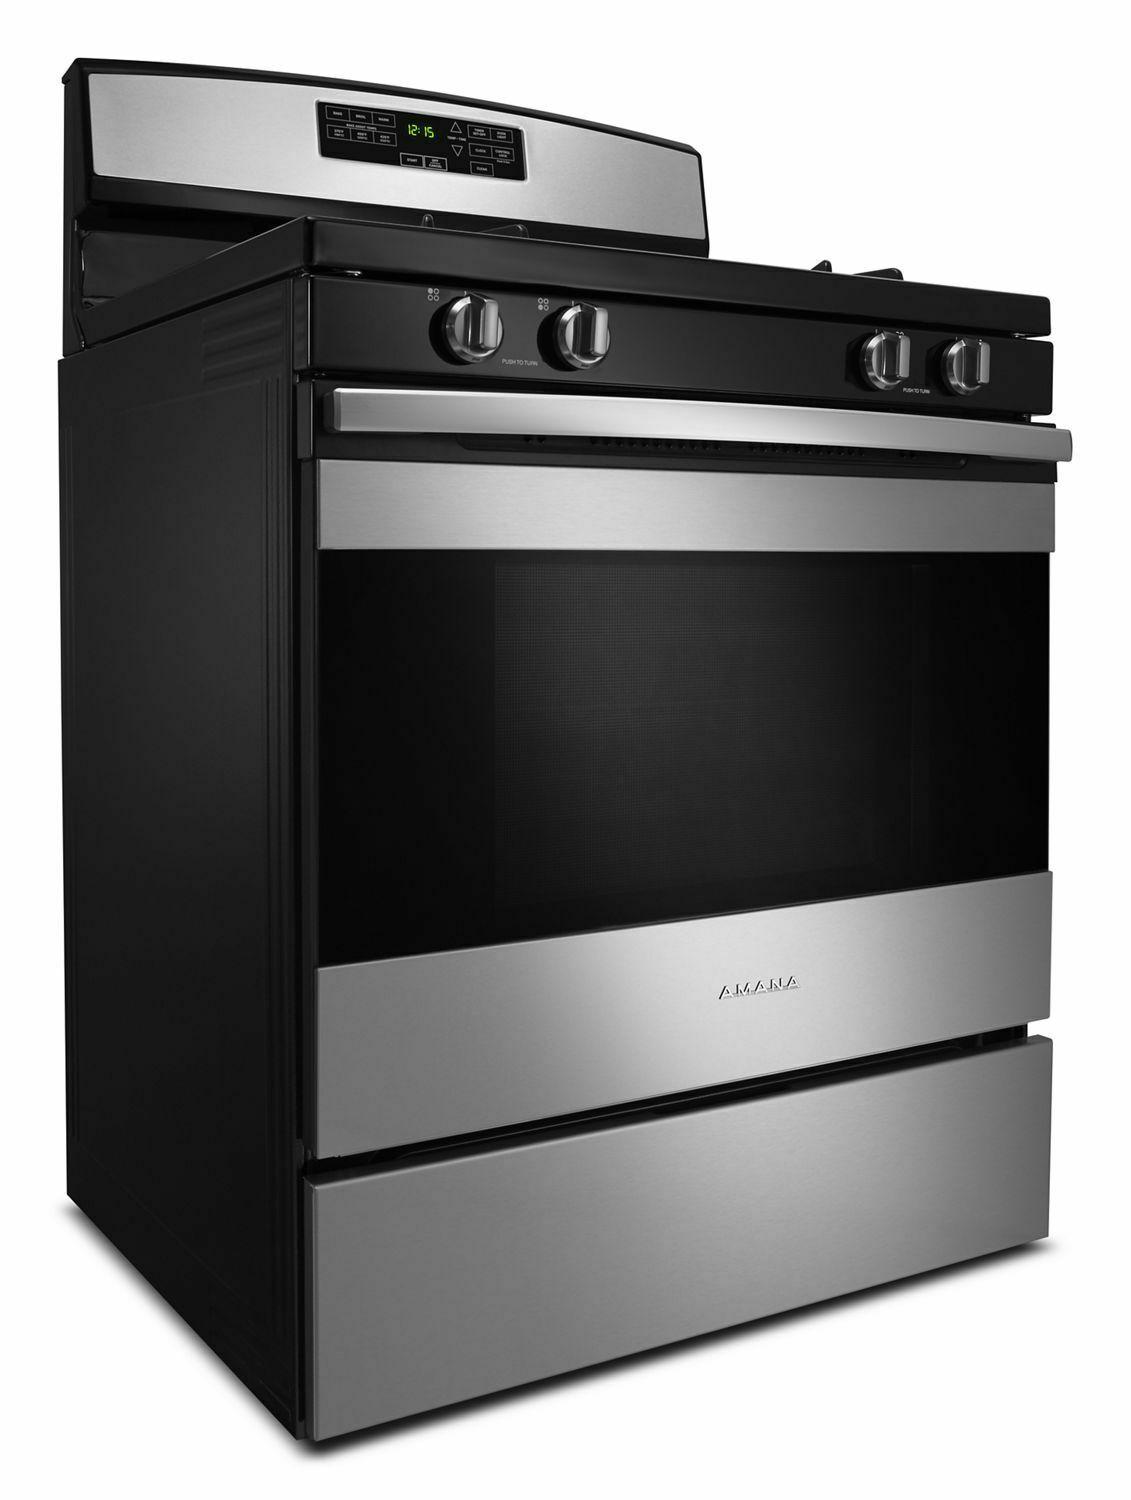 AMANA AGR6603SFS 30-inch Gas Range with Self-Clean Option - Stainless Steel